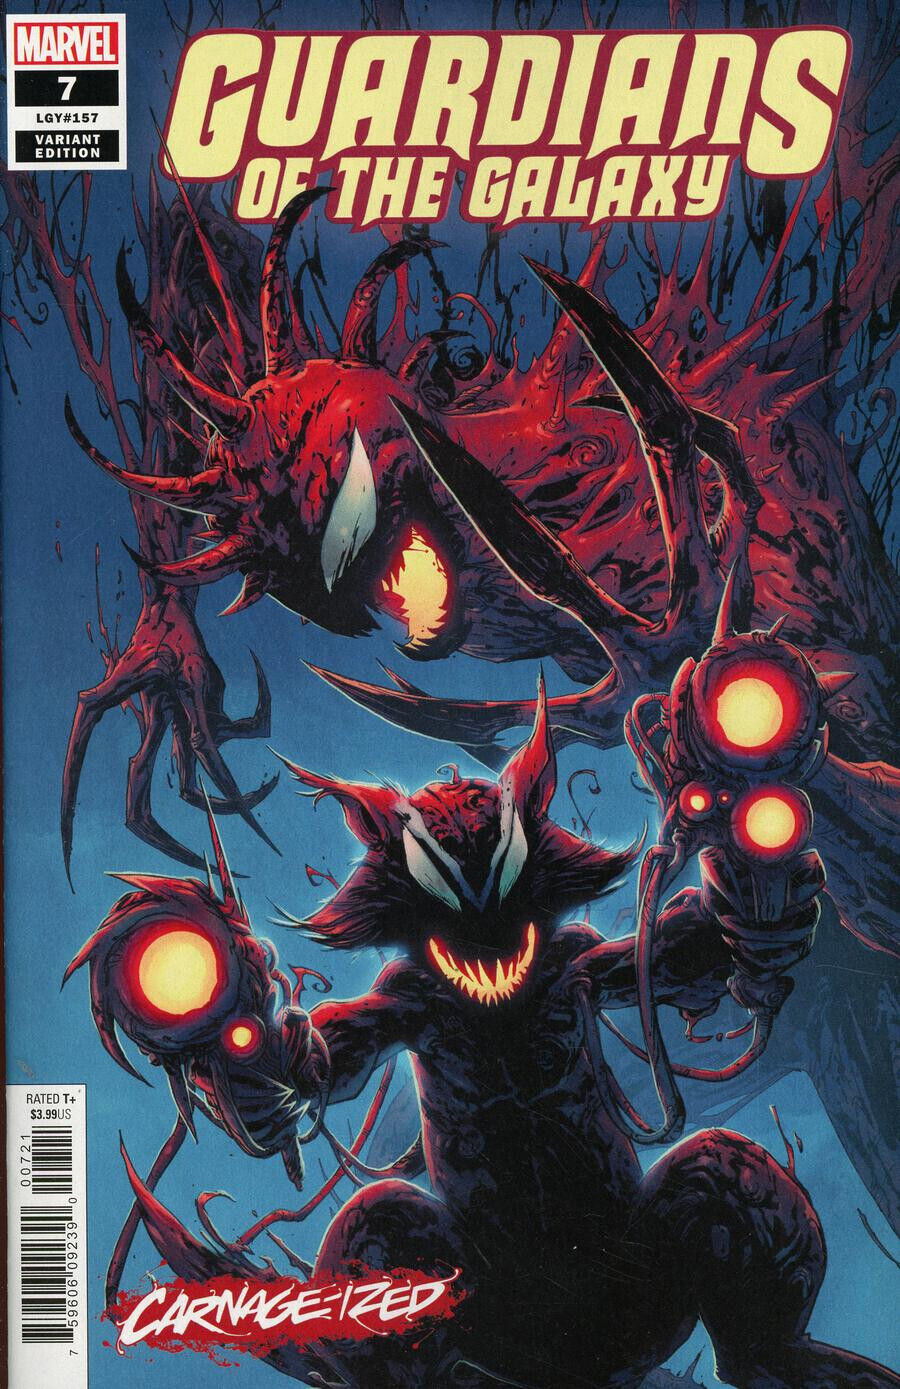 GUARDIANS OF THE GALAXY #7 CAMUNCOLI CARNAGE-IZED VARIANT 2019